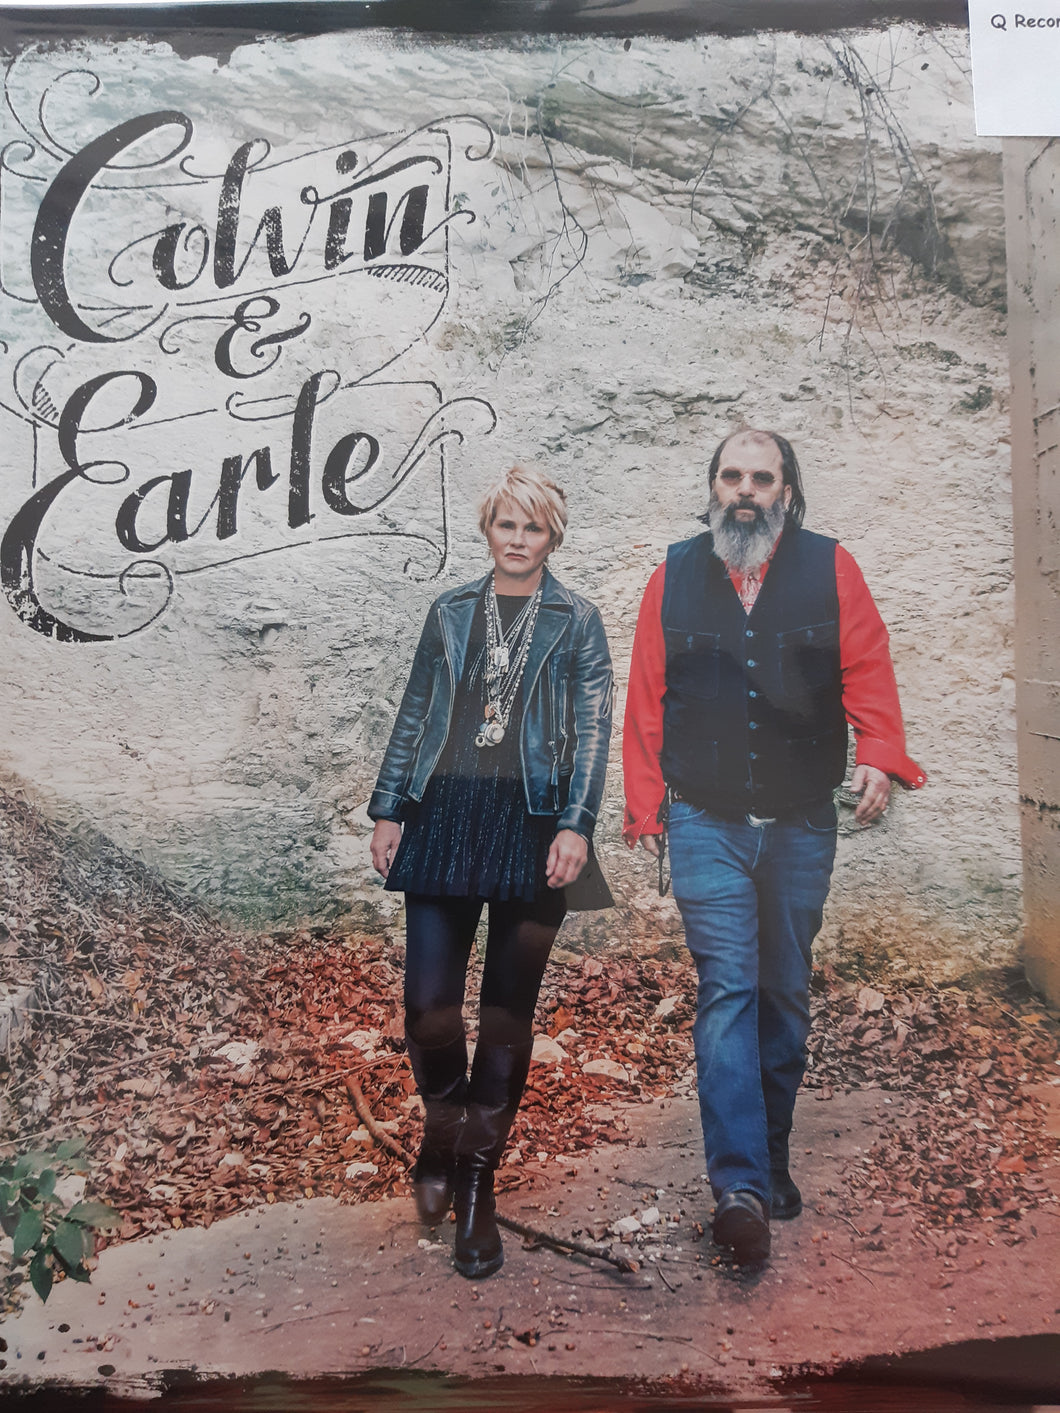 Colvin and Earle - self titled